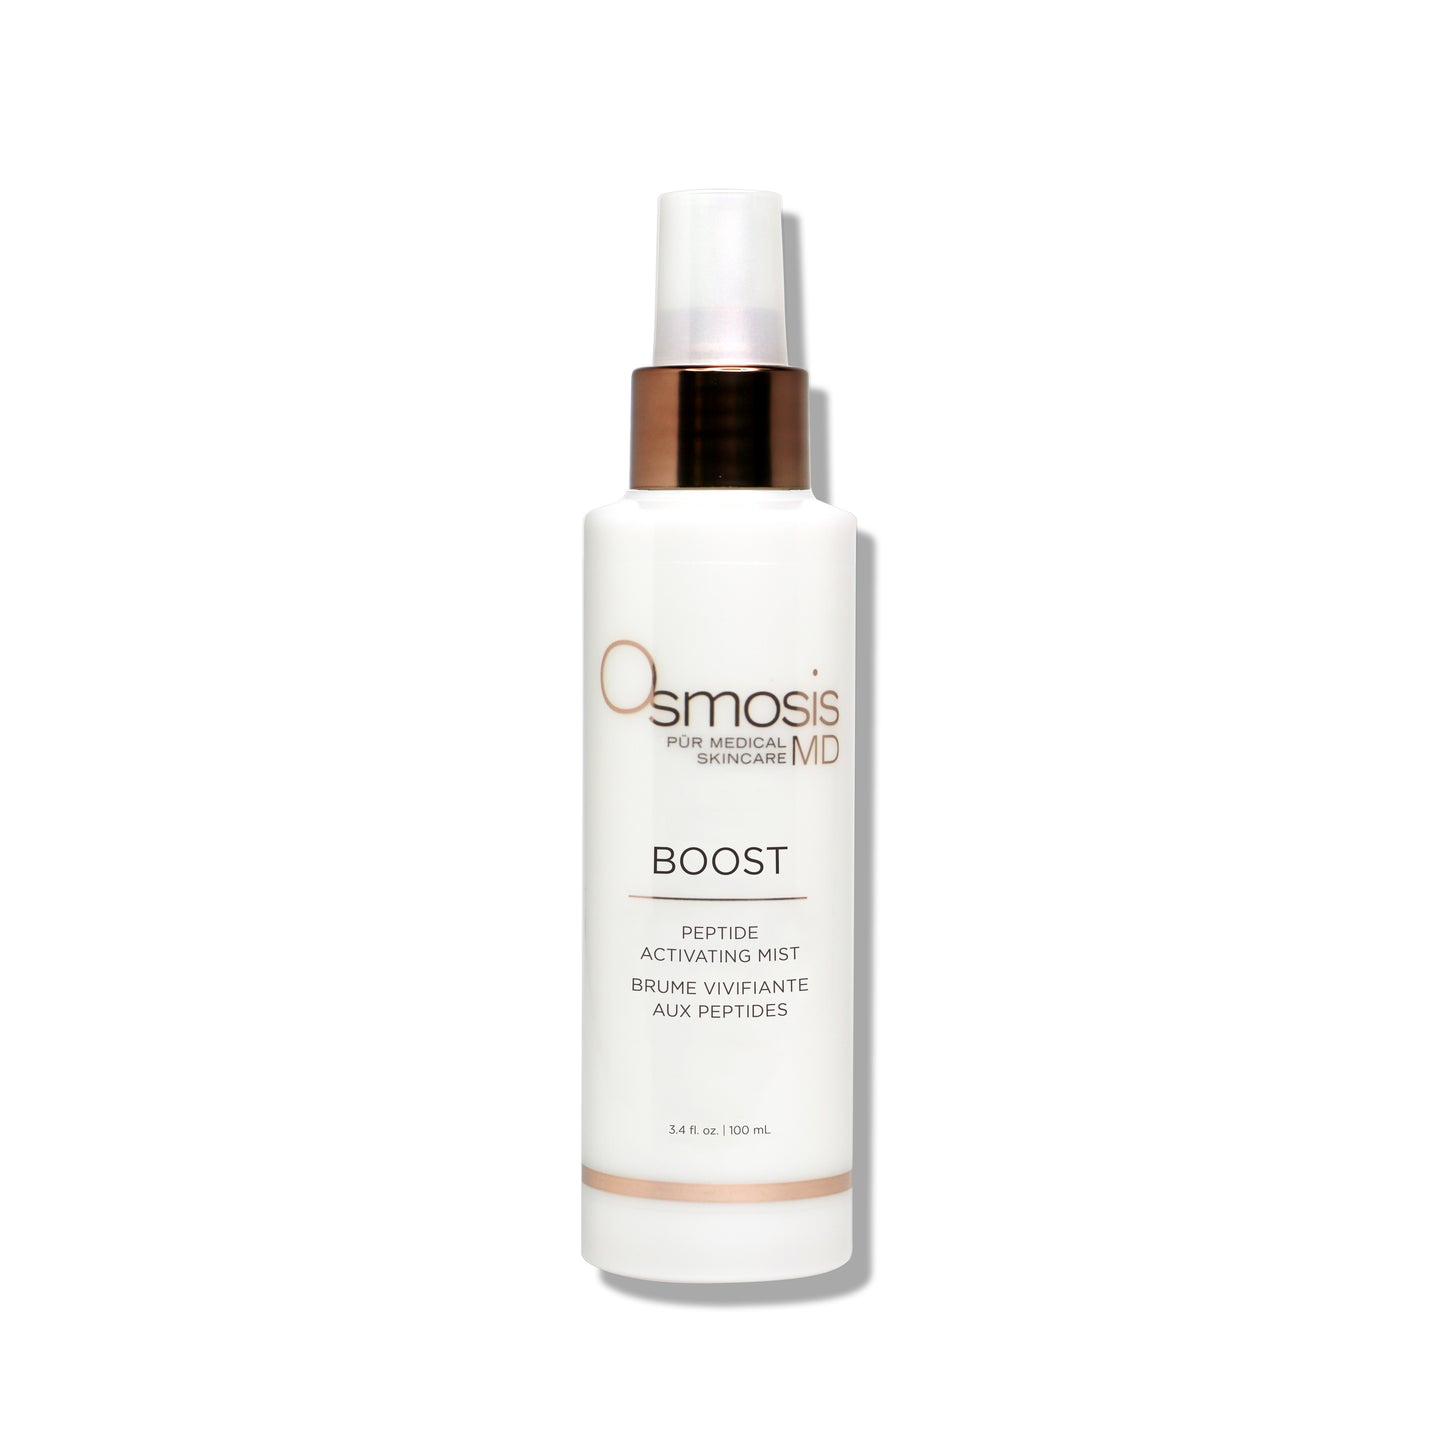 BOOST | PEPTIDE ACTIVATING MIST